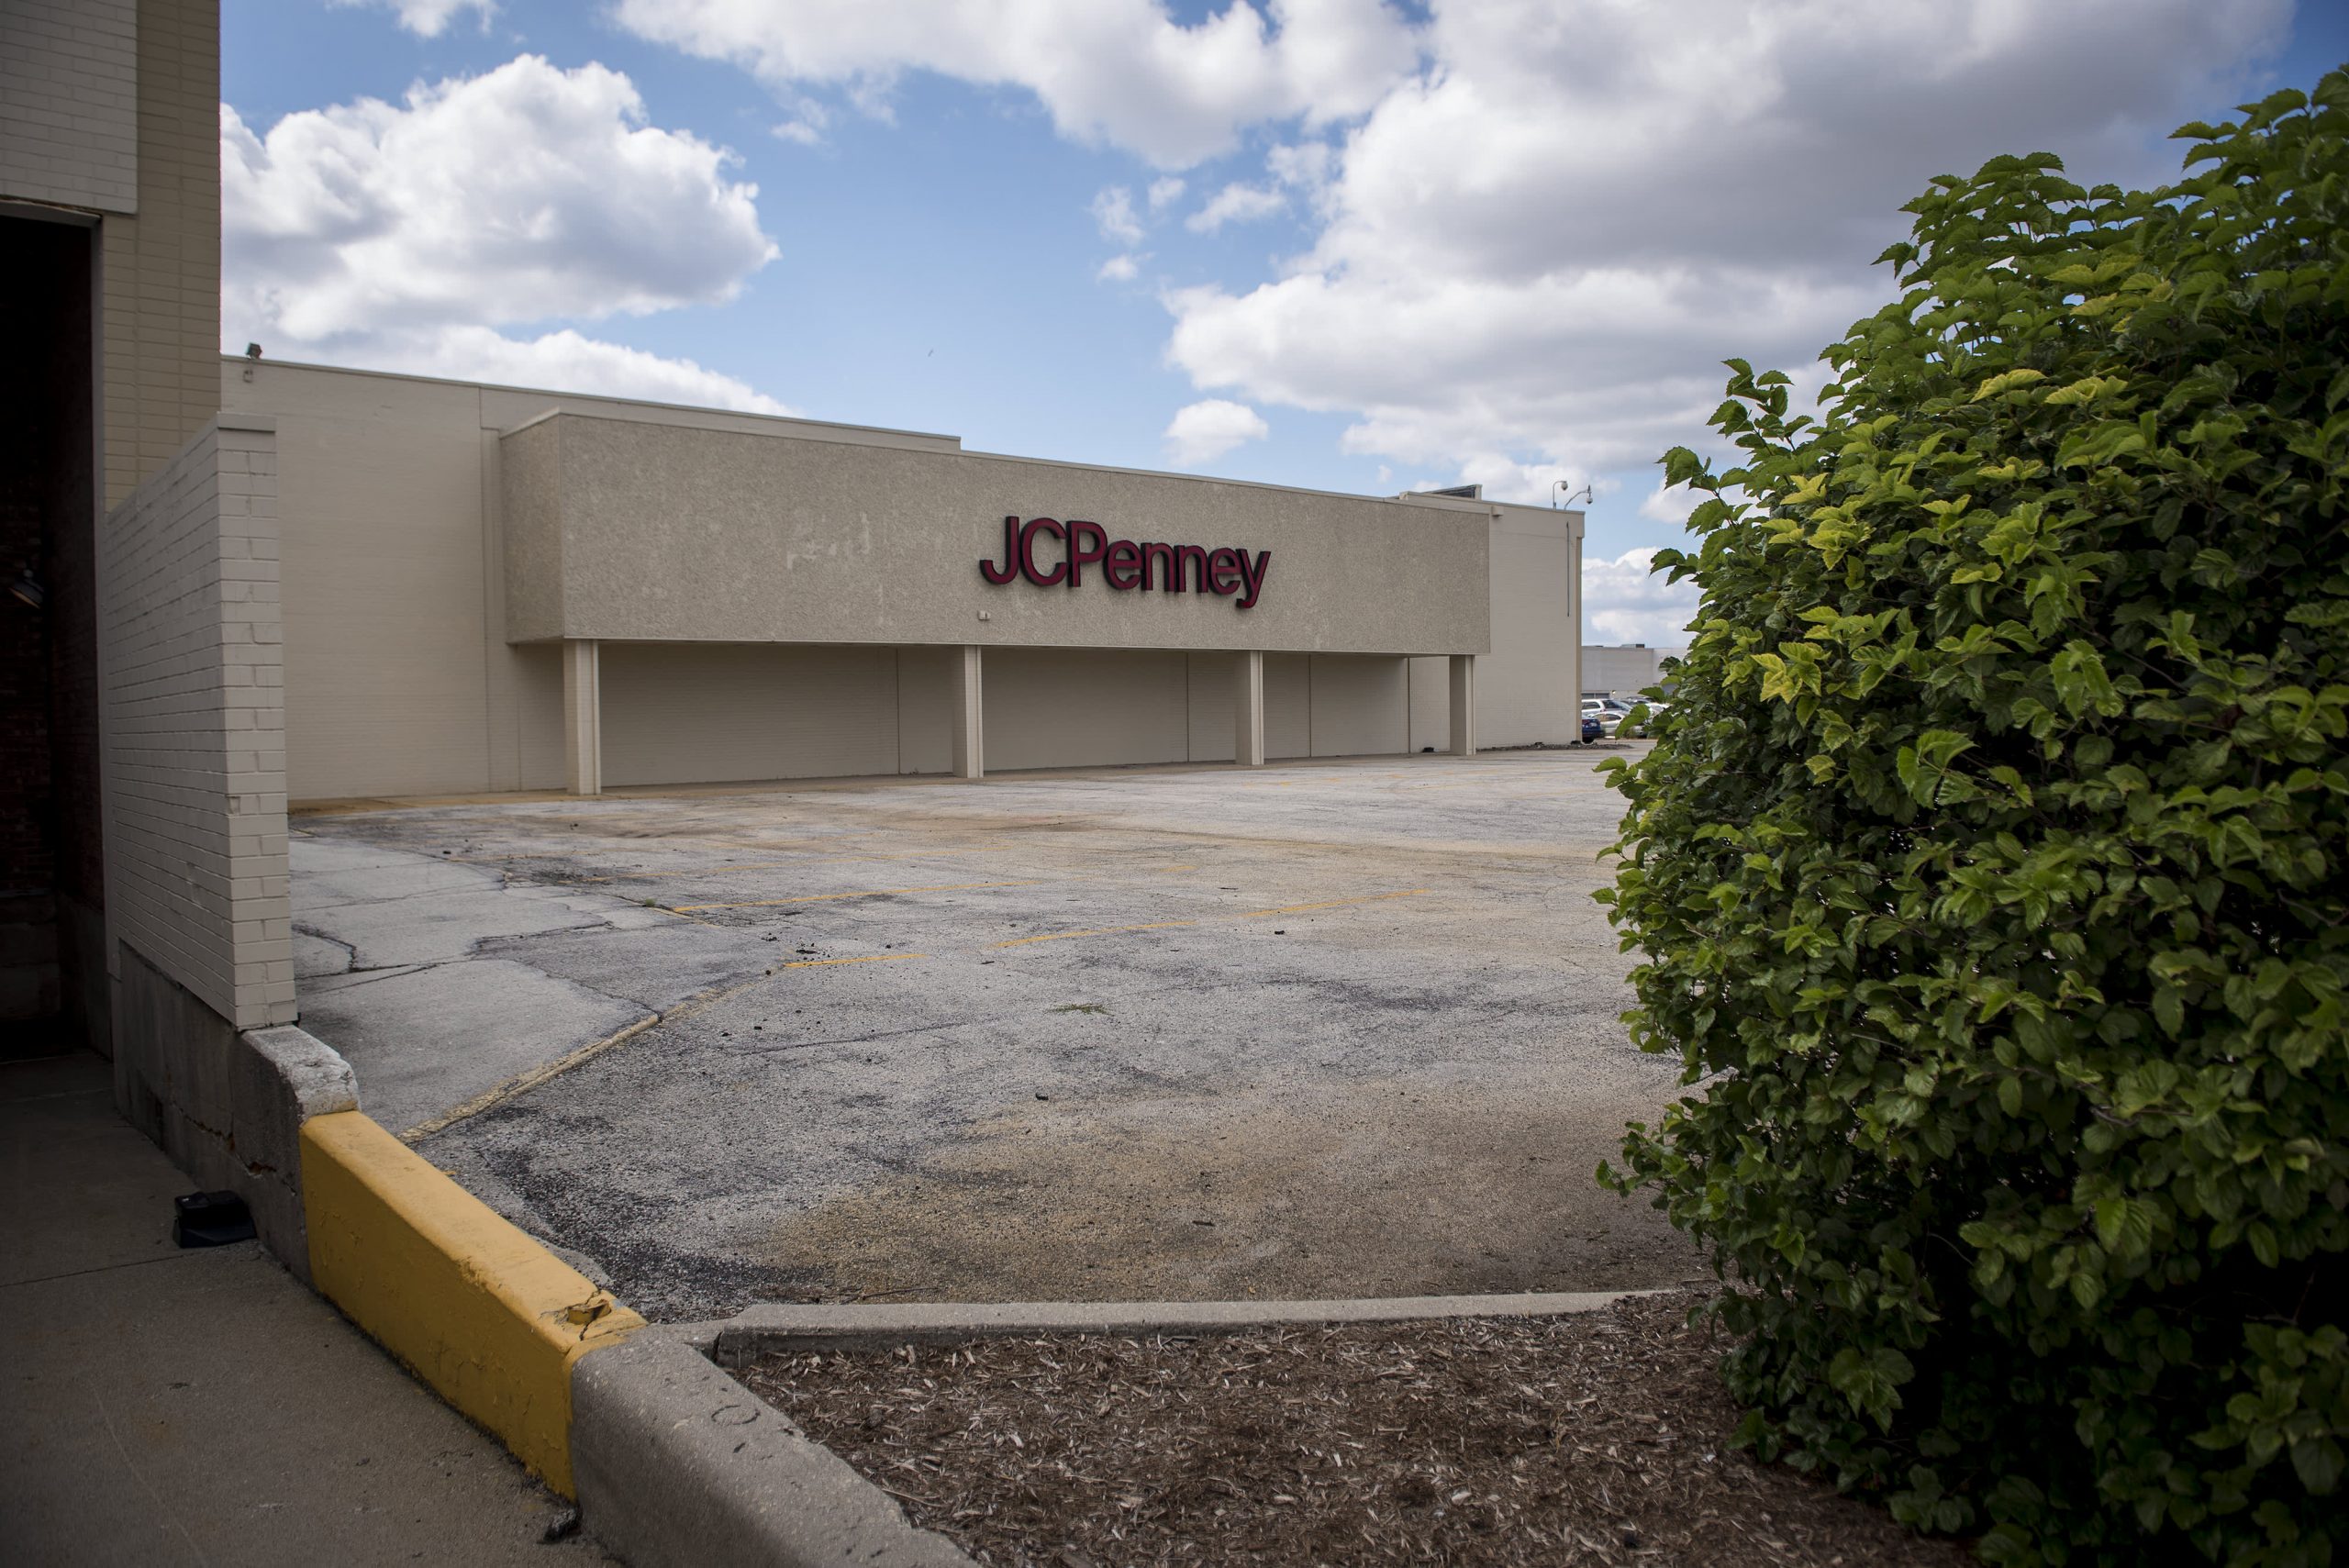 JC Penney CEO Jill Soltau to go away retailer after rising from chapter